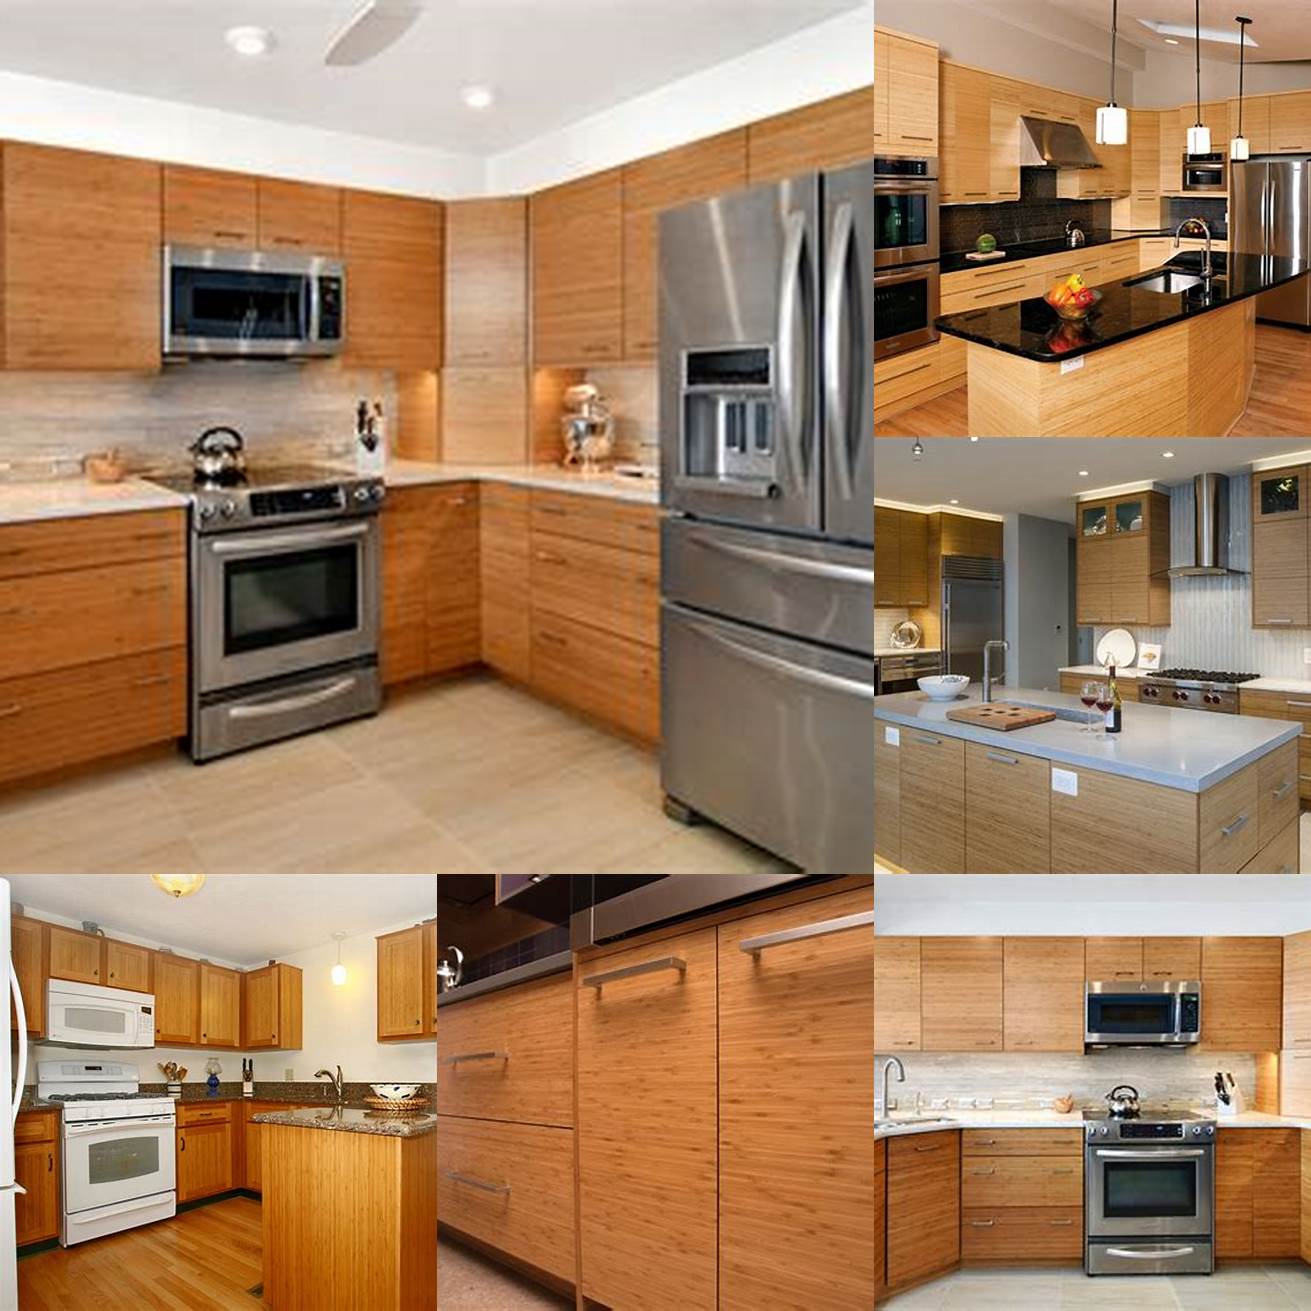 Bamboo kitchen cabinets with natural finish